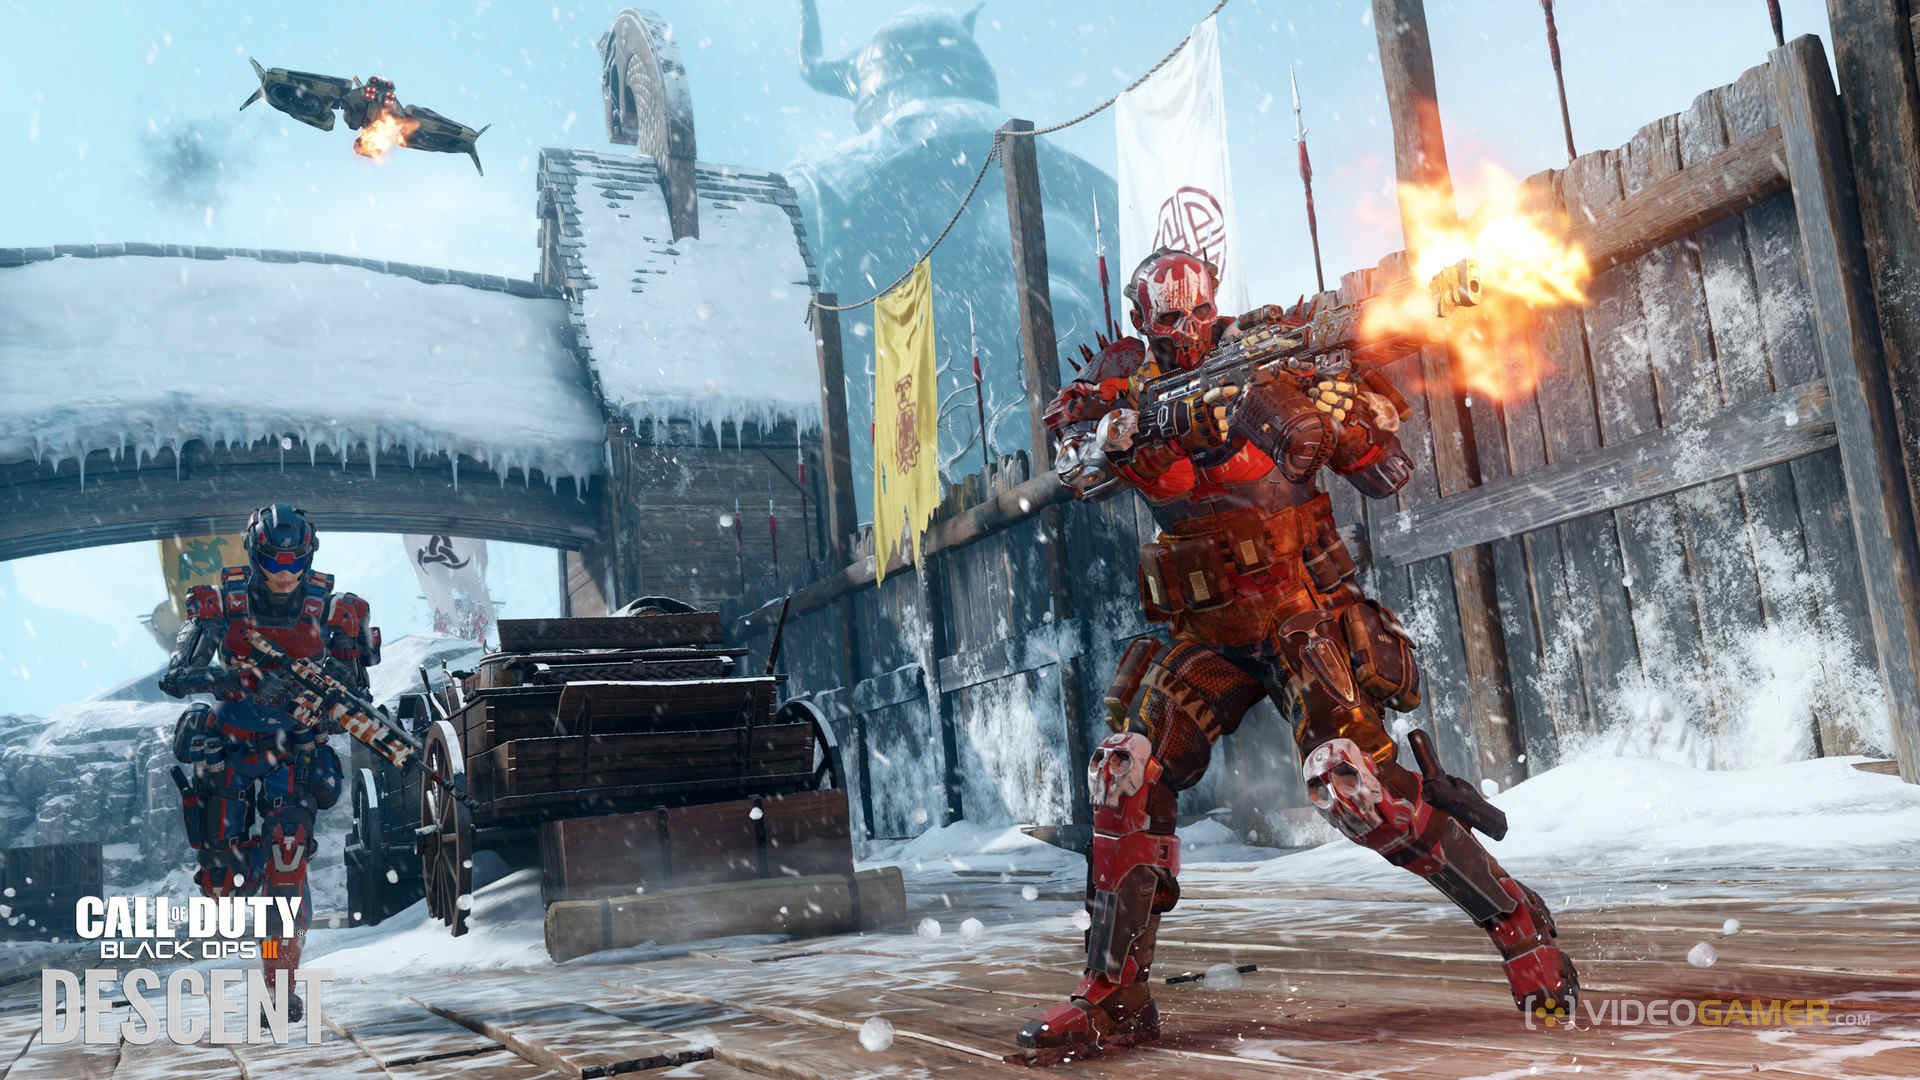 Call Of Duty Black Ops 3 Update 1 27 Features A Brand New Map Videogamer Com